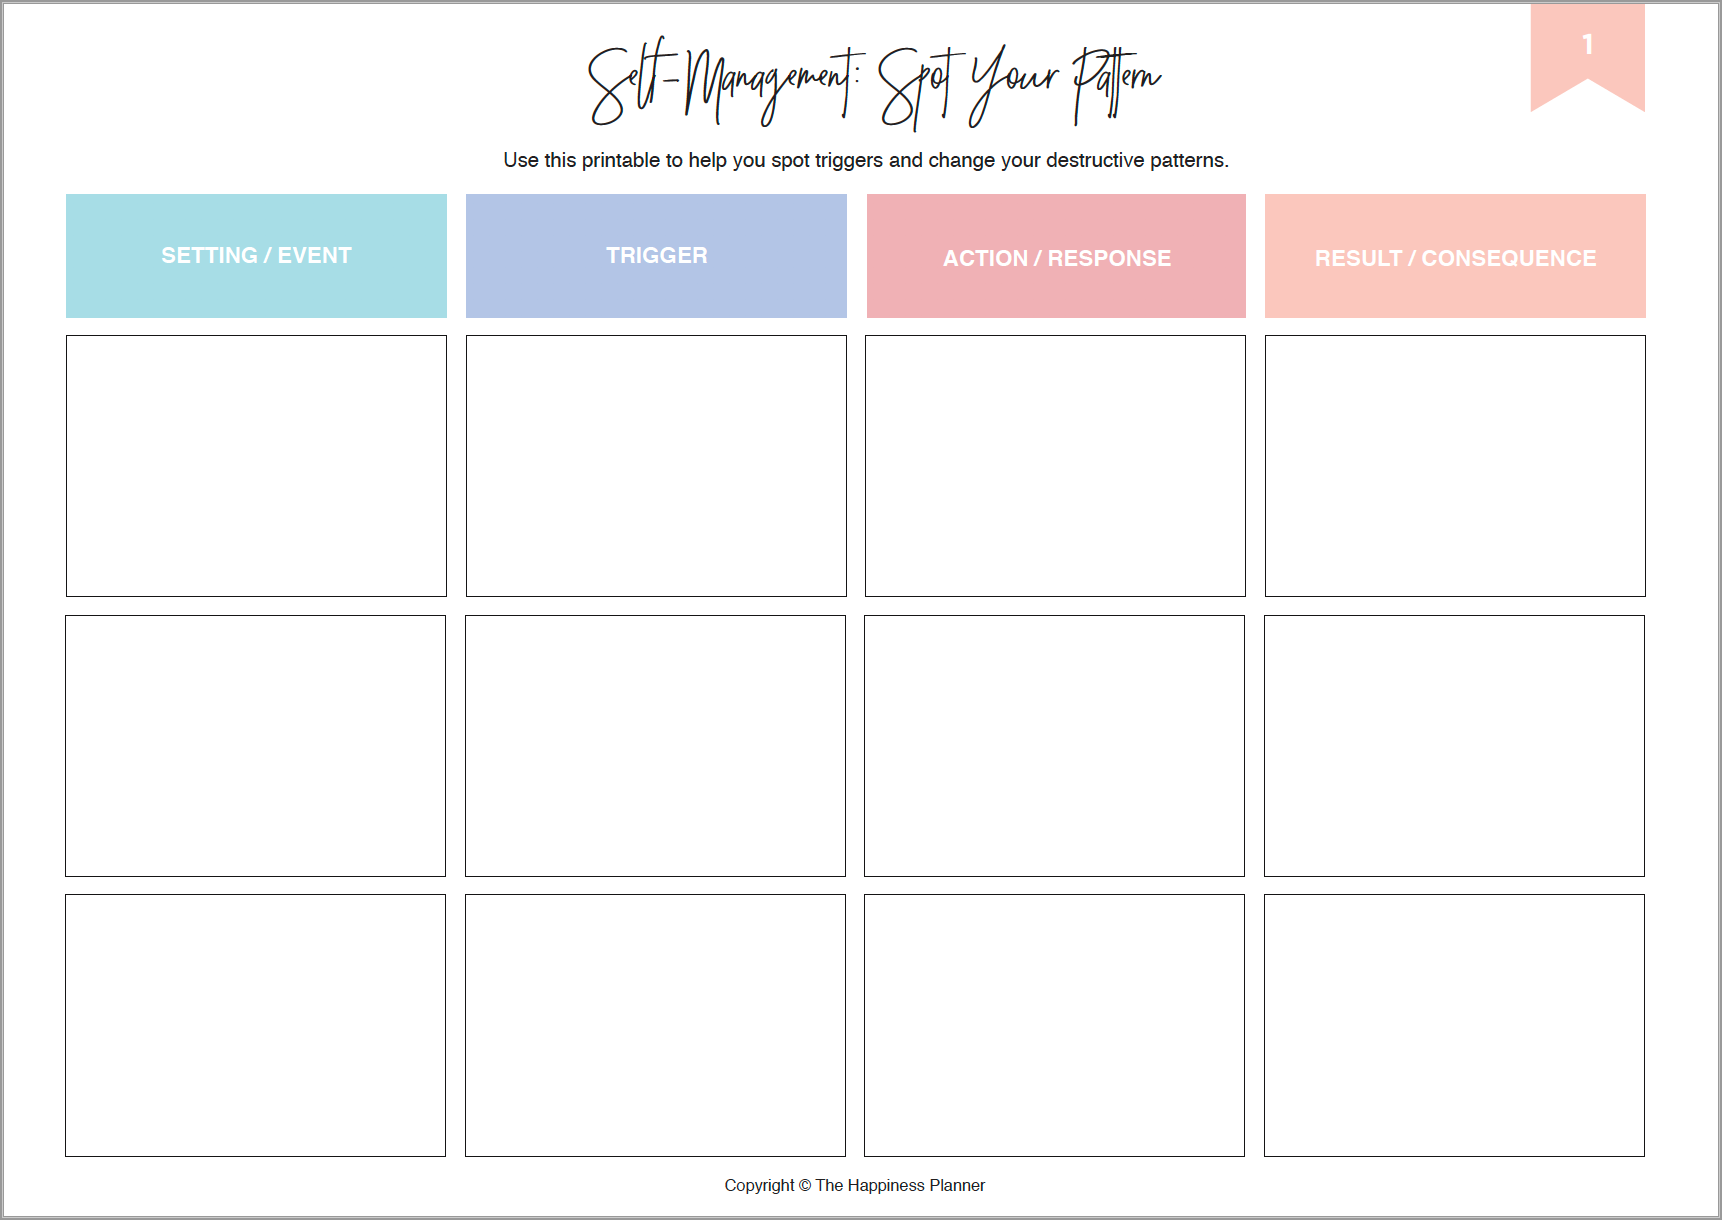 Printables: #Habit/Pattern - The Happiness Planner®